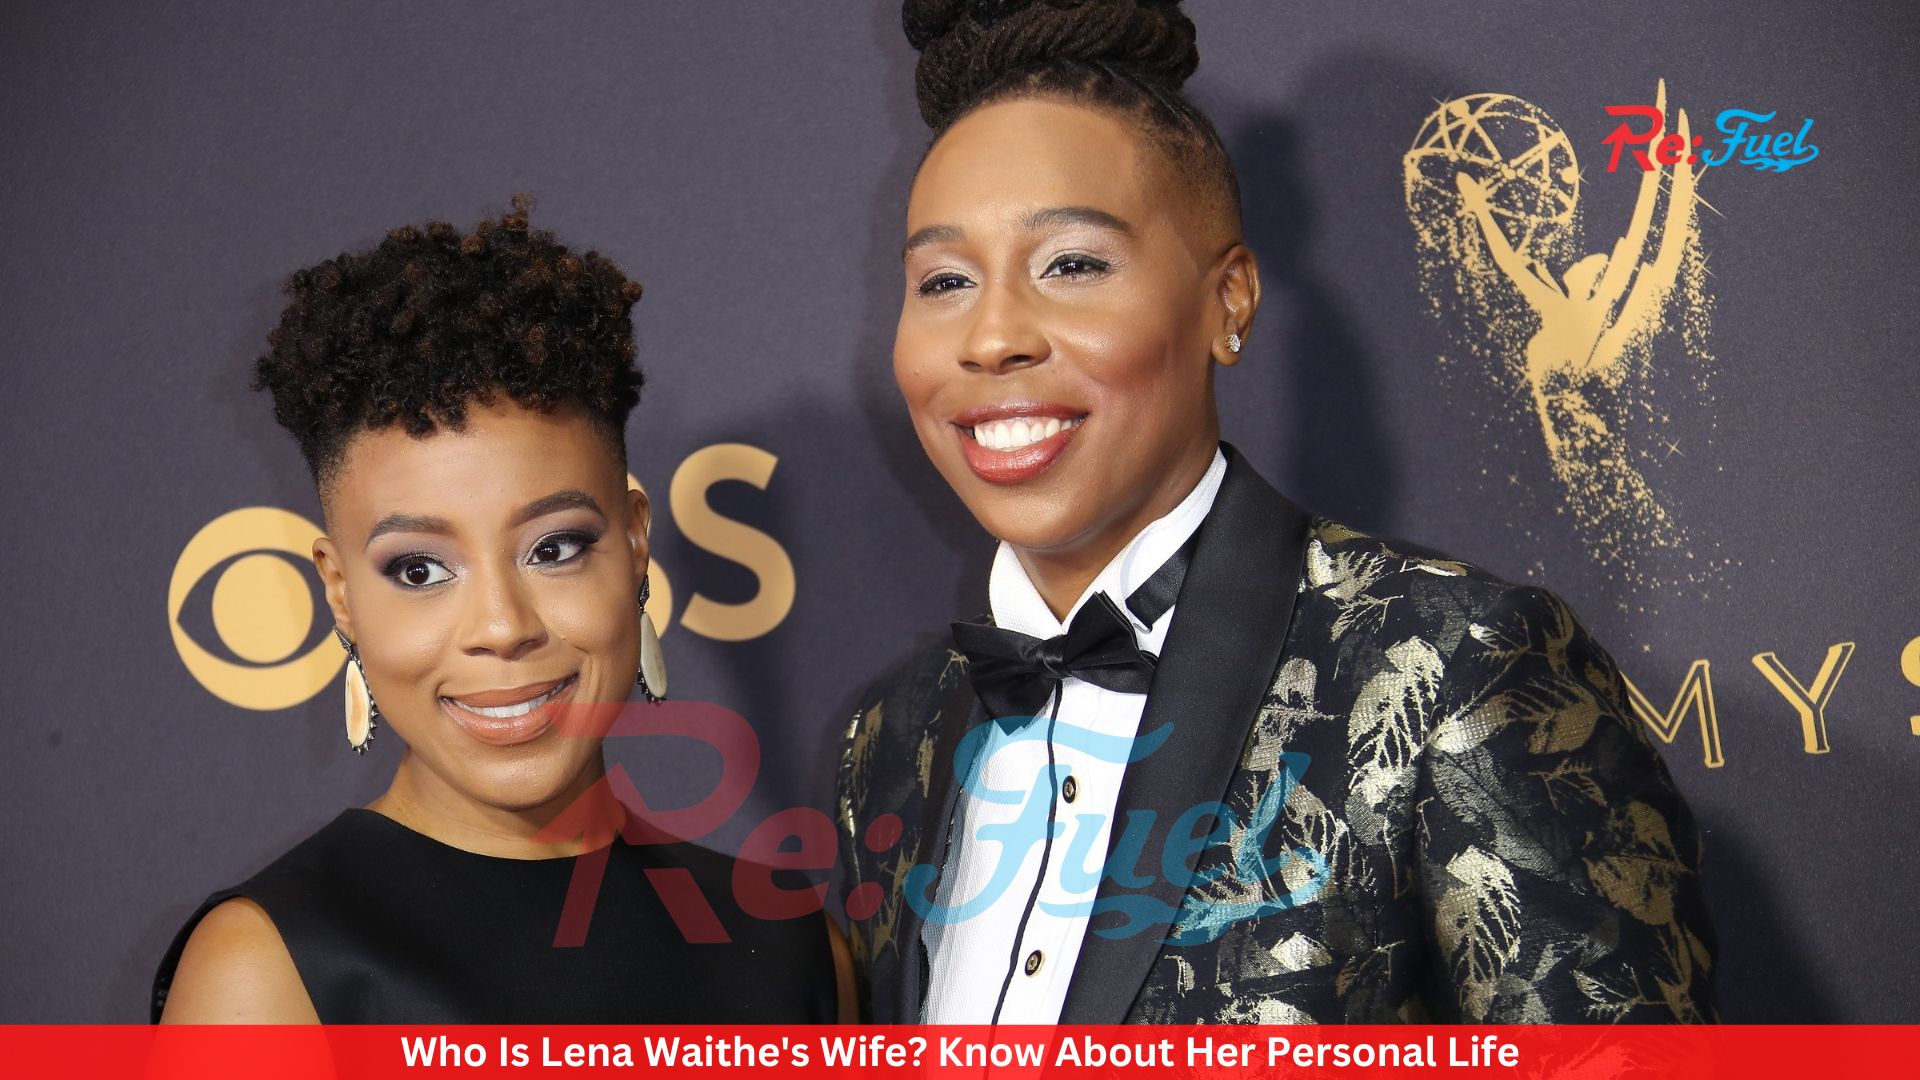 Who Is Lena Waithe's Wife? Know About Her Personal Life